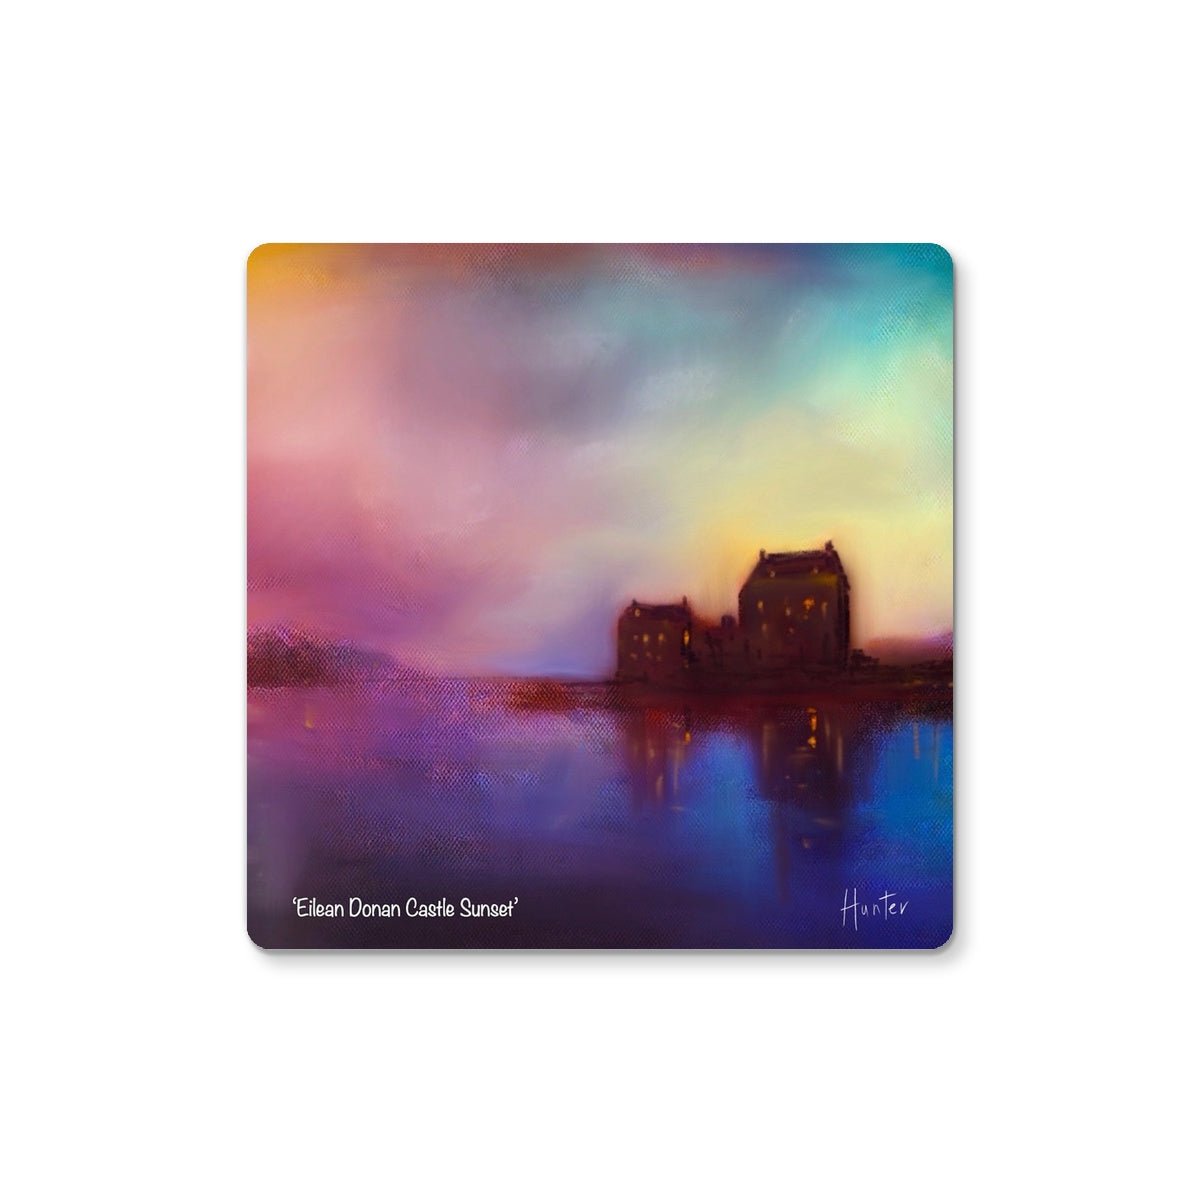 Eilean Donan Castle Sunset Art Gifts Coaster-Coasters-Historic & Iconic Scotland Art Gallery-2 Coasters-Paintings, Prints, Homeware, Art Gifts From Scotland By Scottish Artist Kevin Hunter